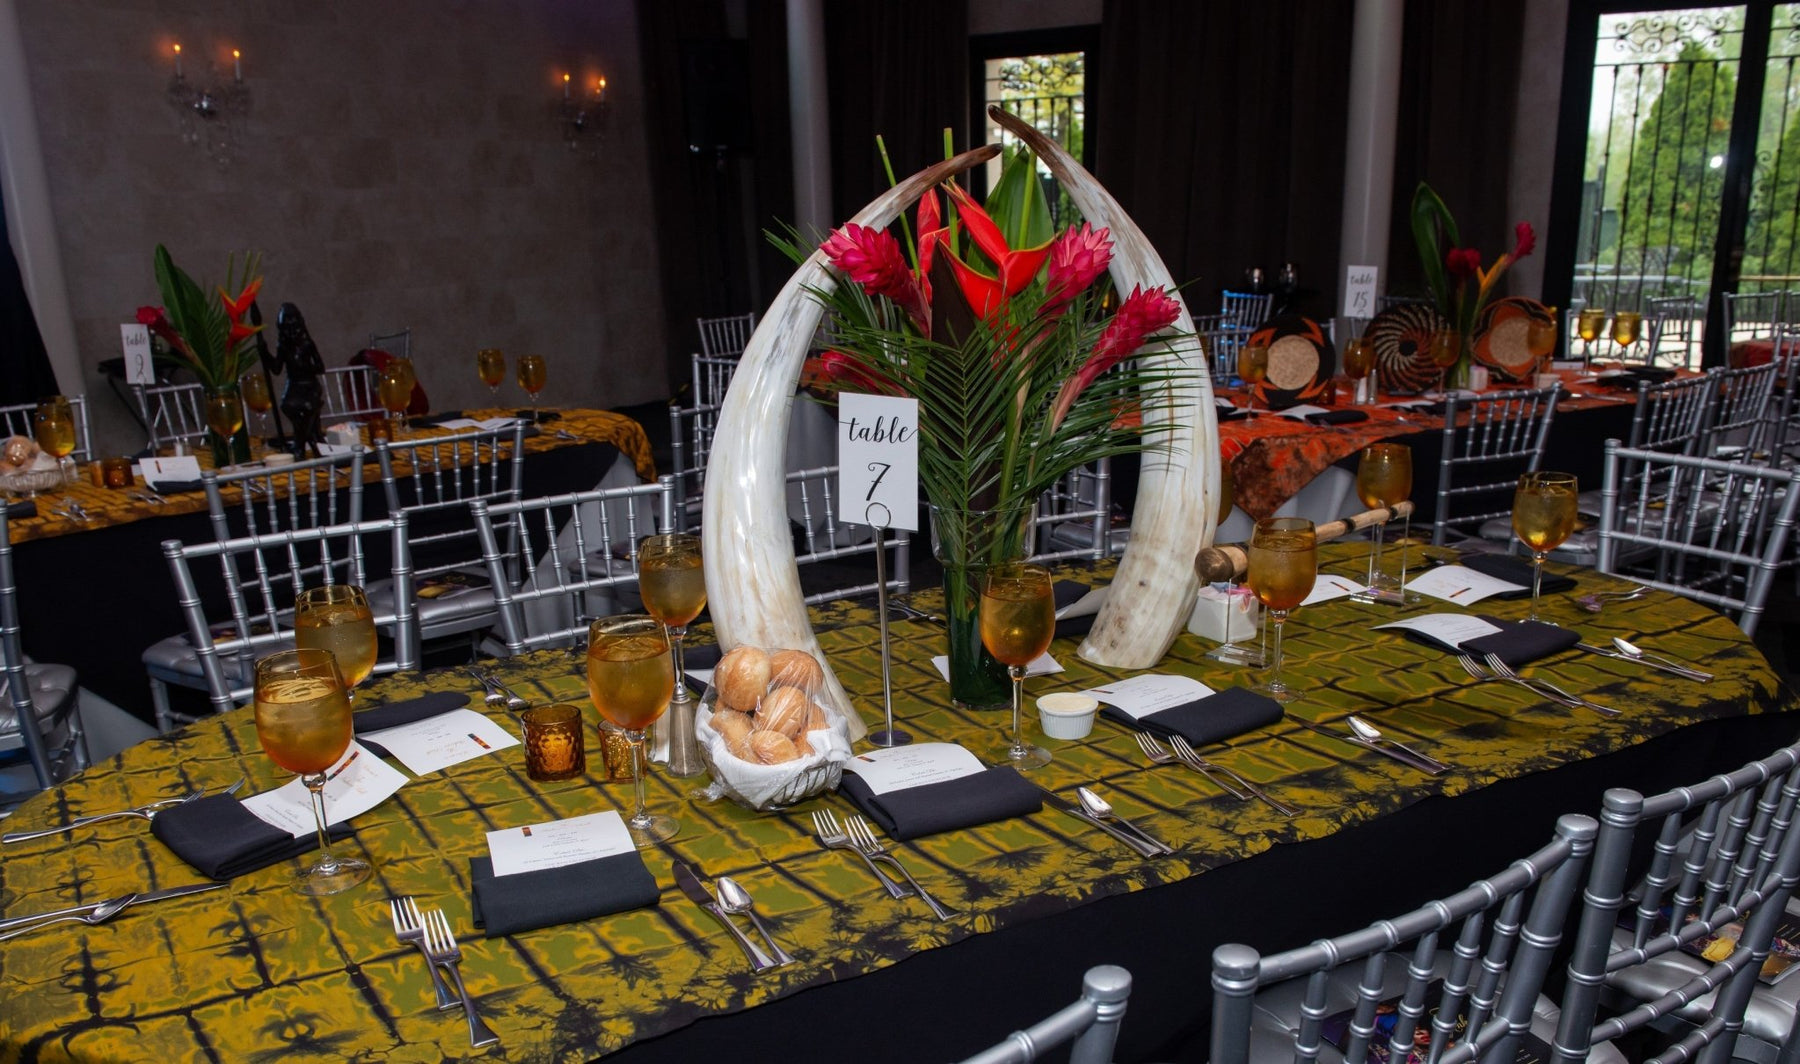 Beautiful Table Settings and Home Decor for the Holidays from Luangisa African Gallery - Luangisa African Gallery